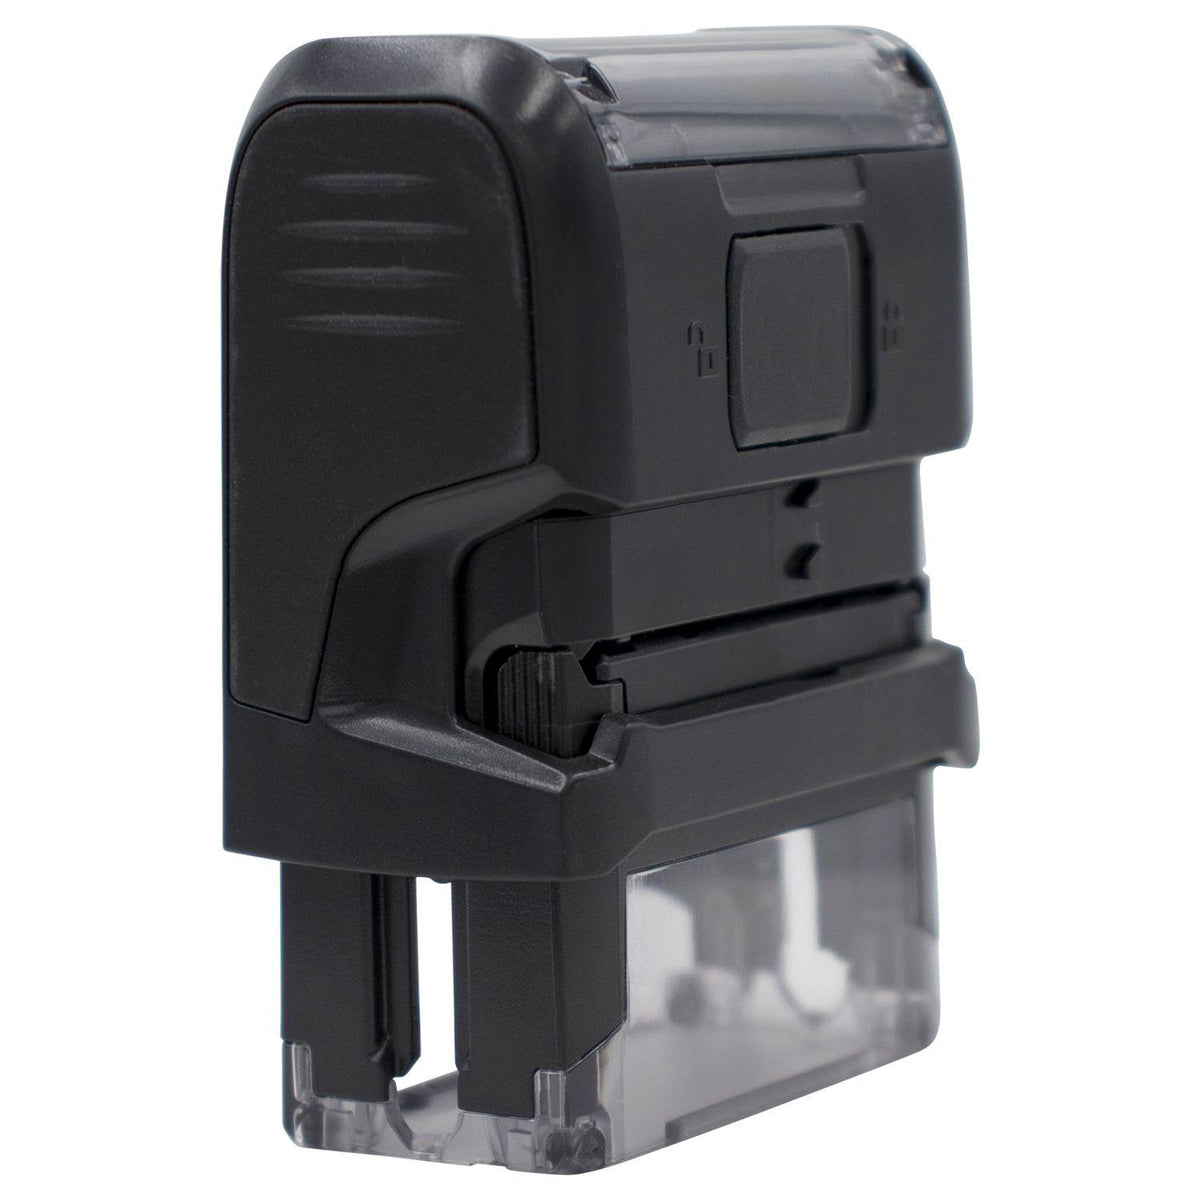 Self Inking Caution Stamp - Engineer Seal Stamps - Brand_Trodat, Impression Size_Small, Stamp Type_Self-Inking Stamp, Type of Use_Postal &amp; Mailing, Type of Use_Shipping &amp; Receiving